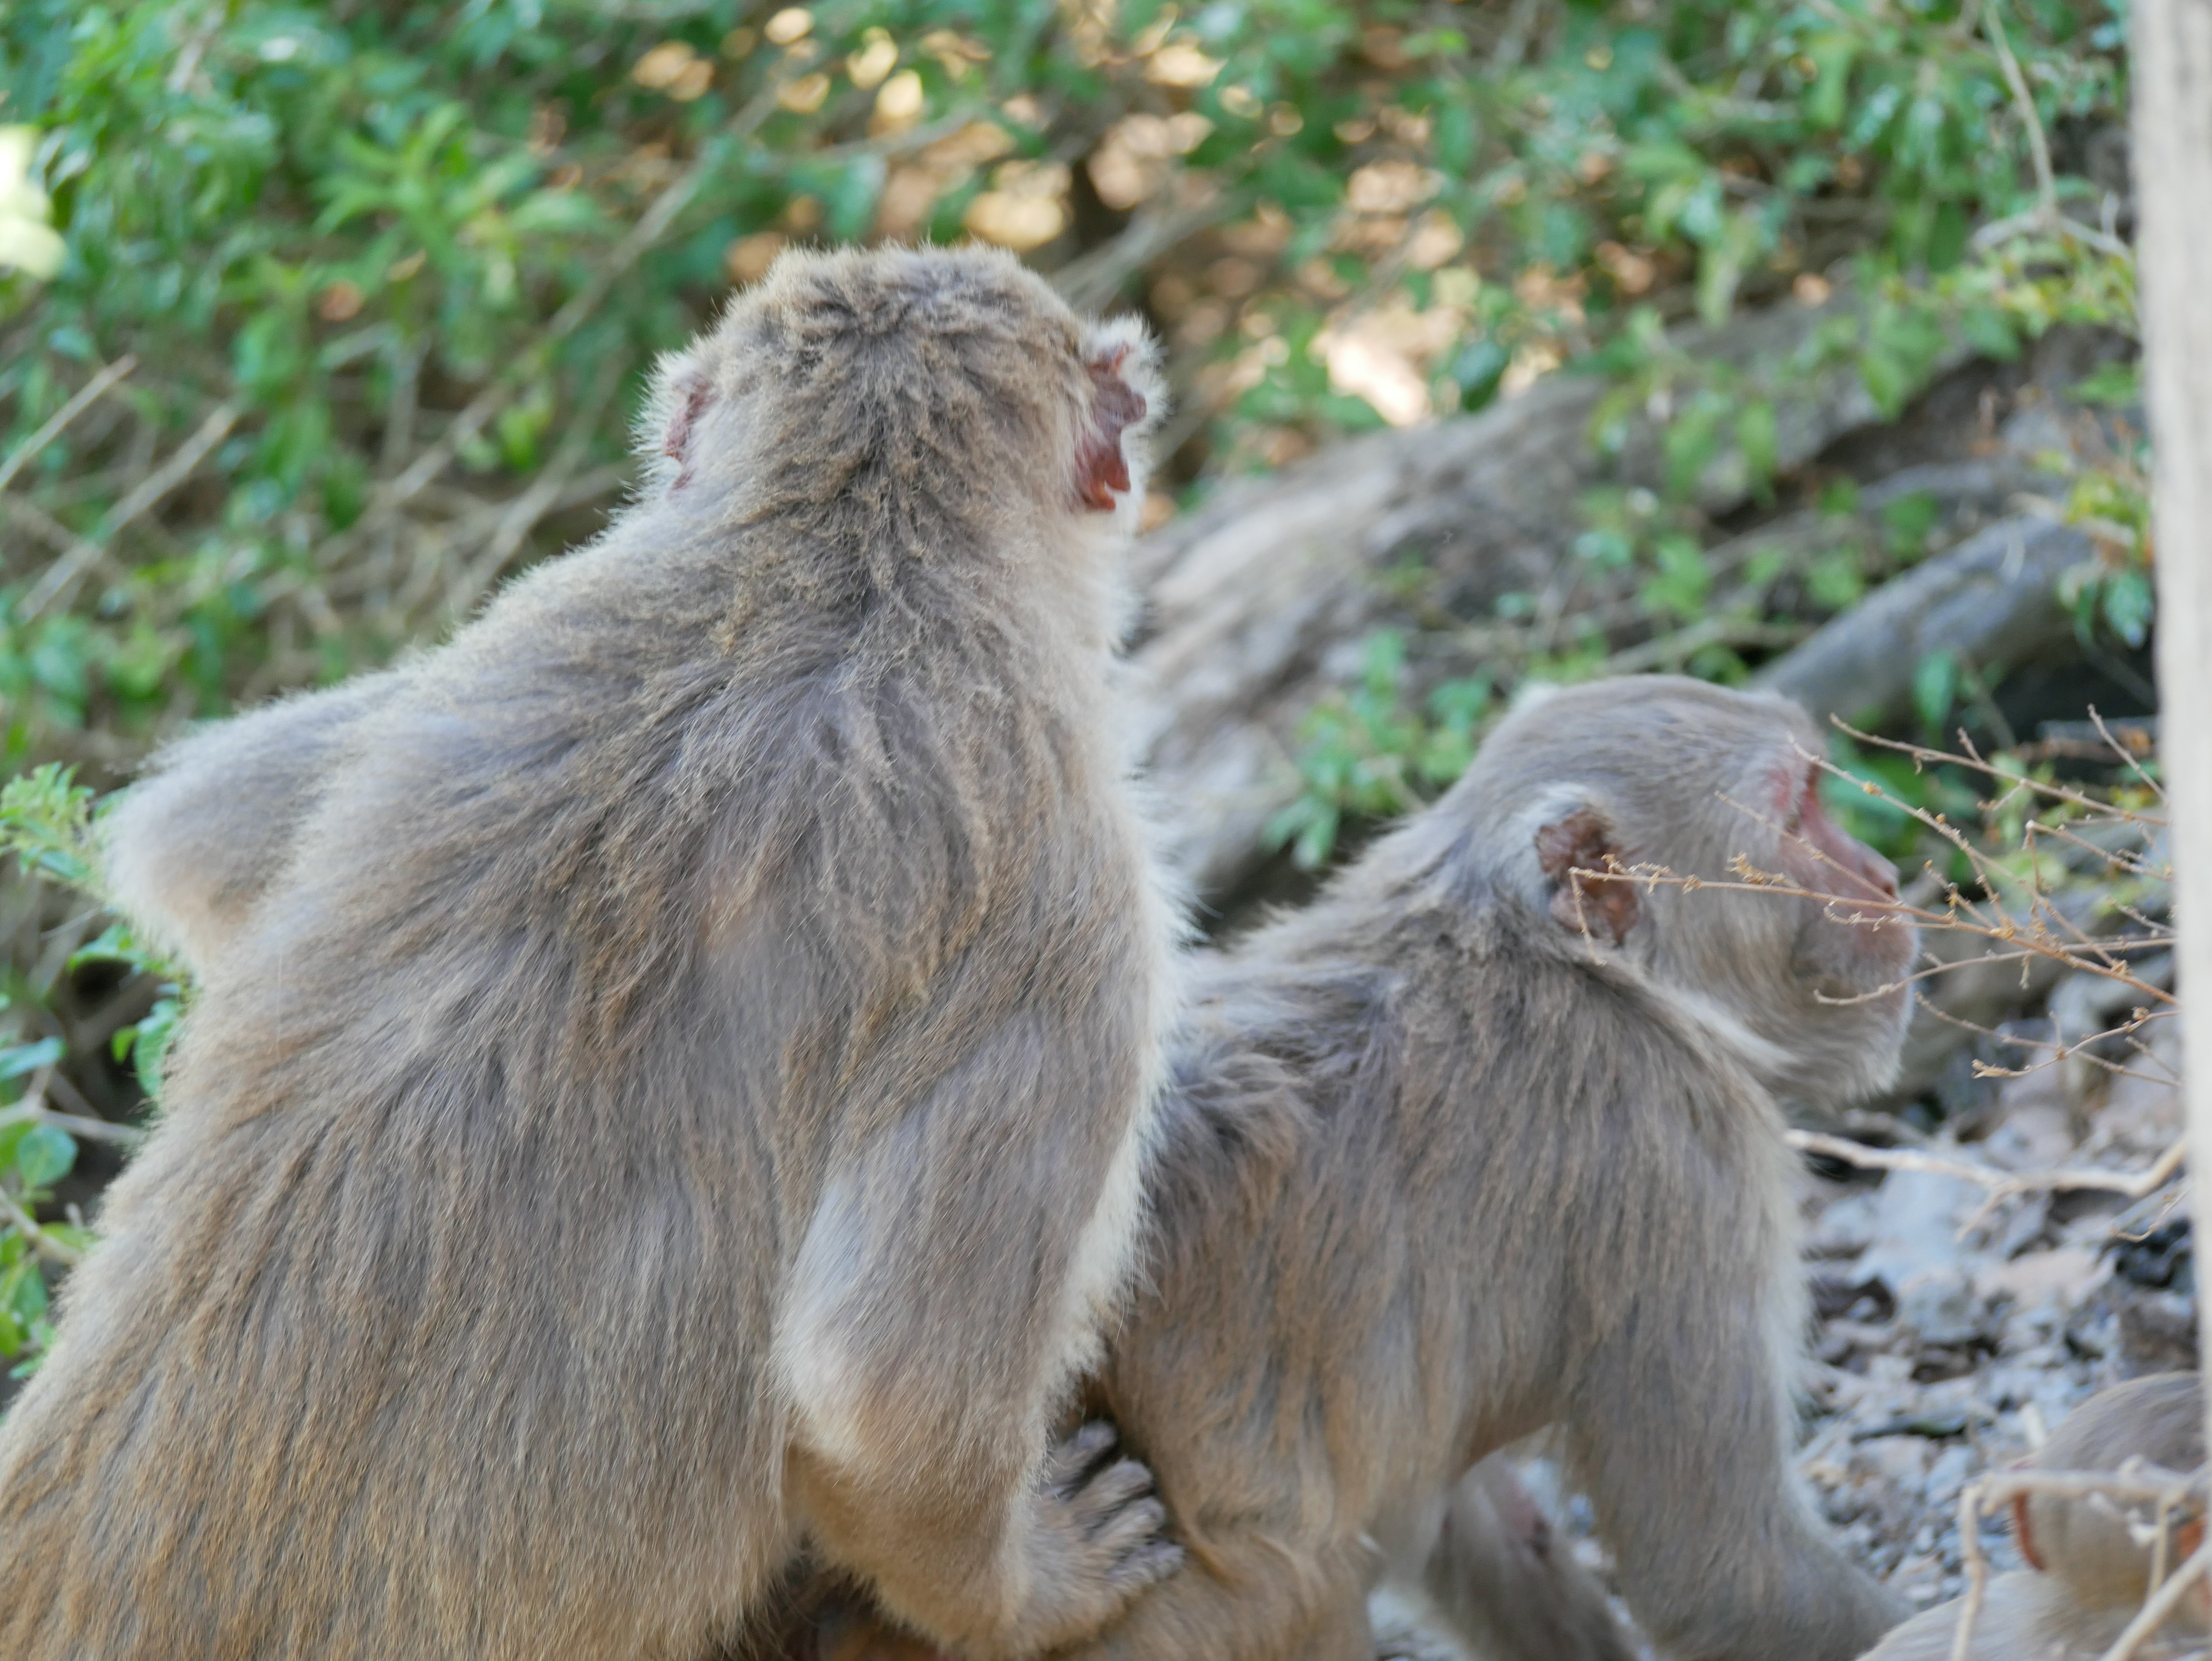 A male monkey mounting another male